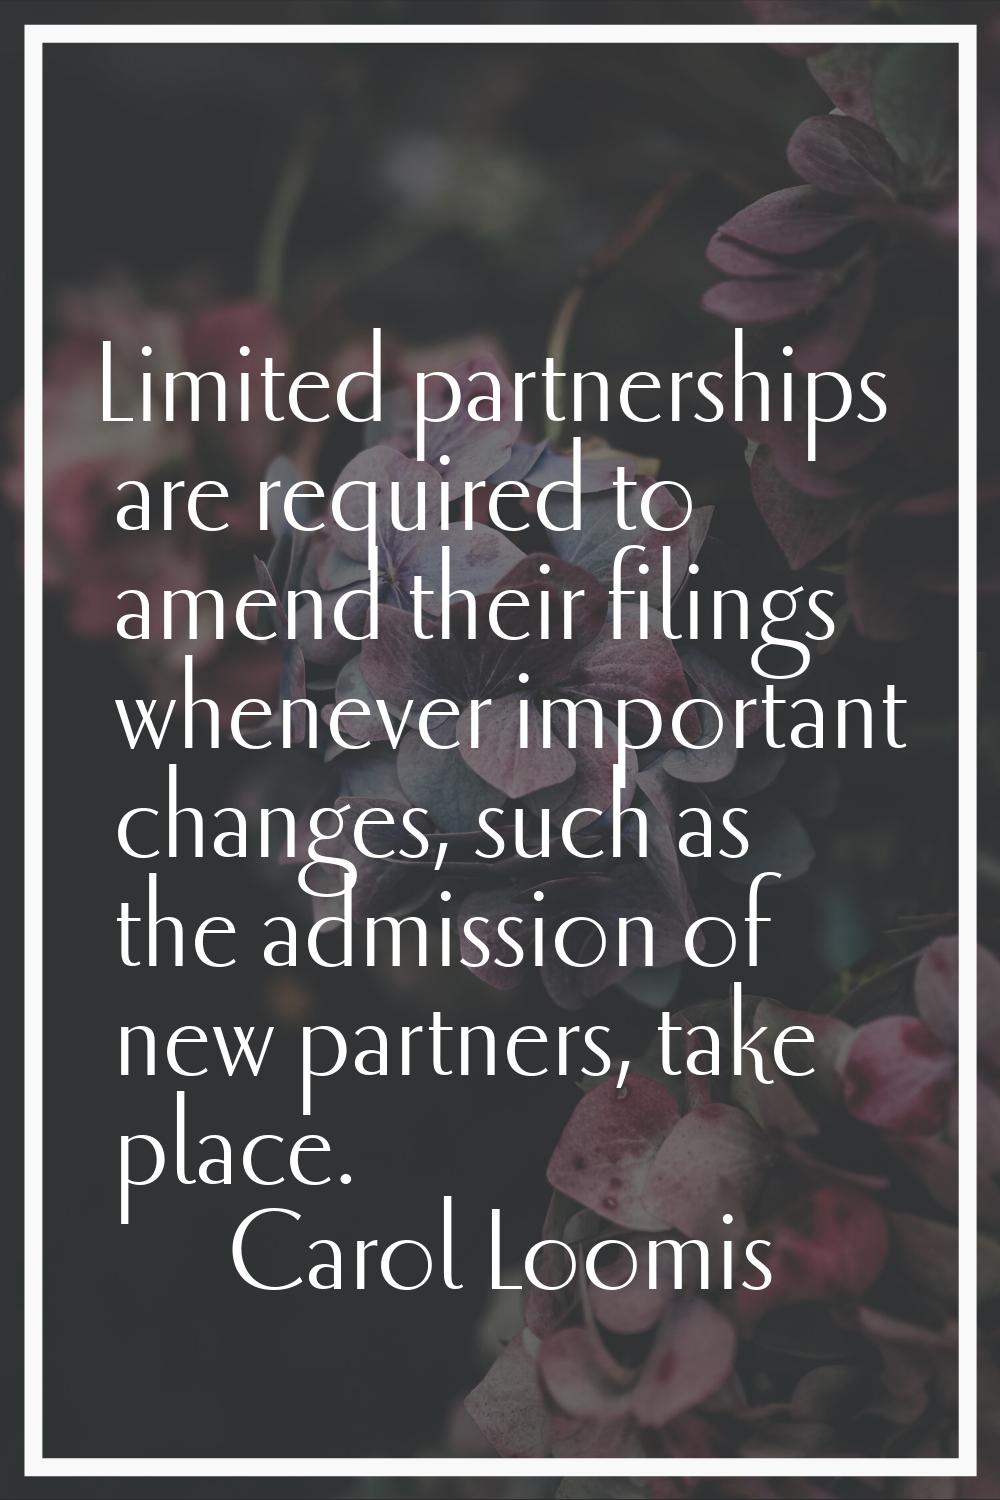 Limited partnerships are required to amend their filings whenever important changes, such as the ad